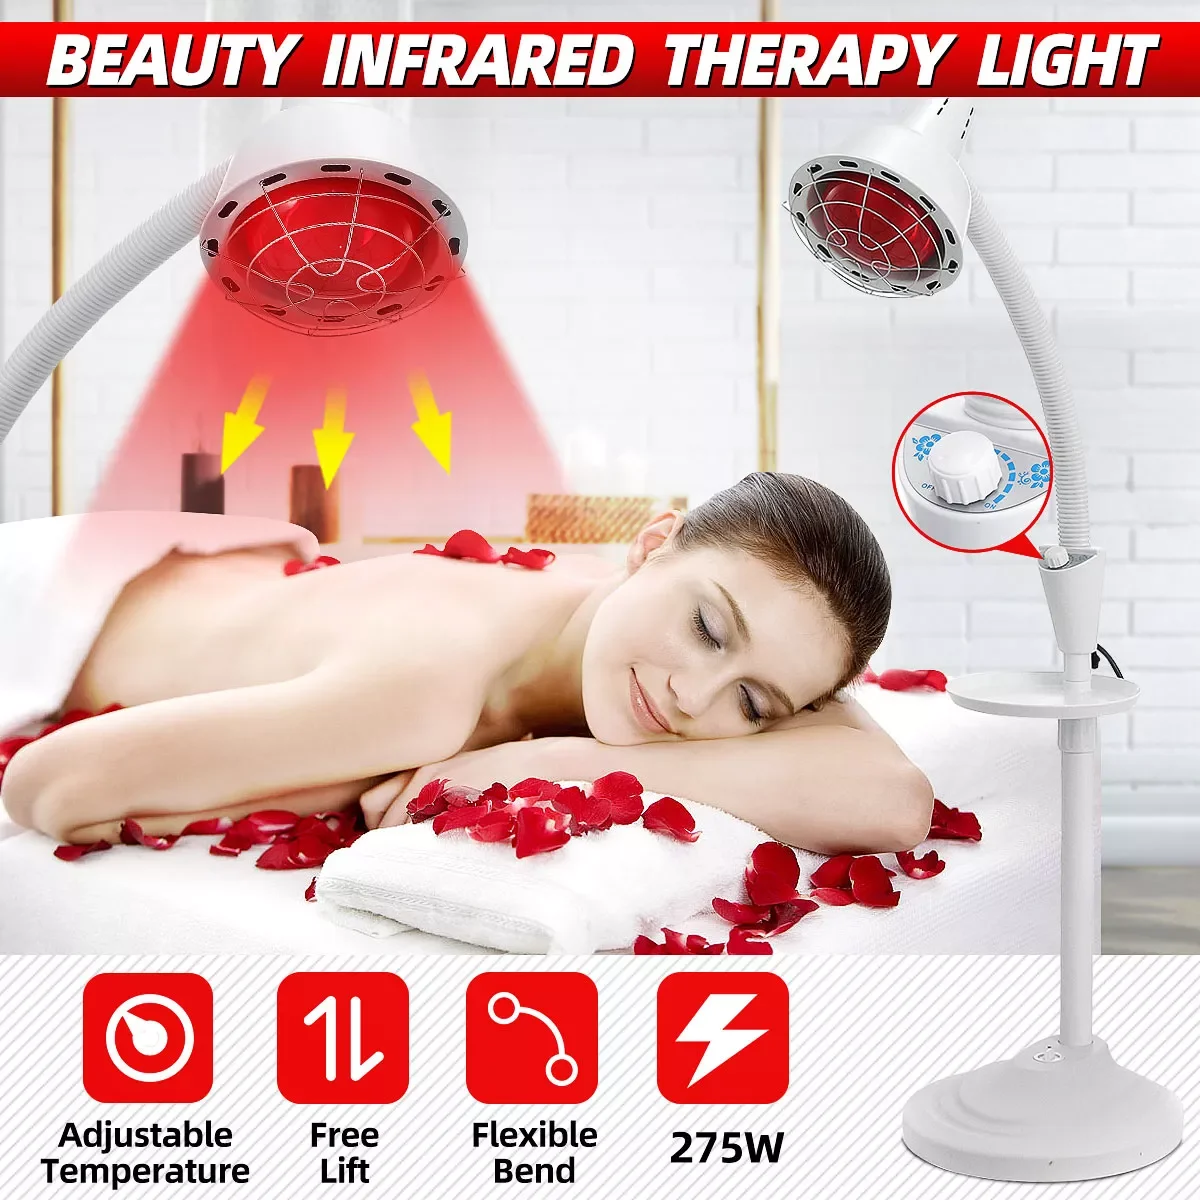 

275W Infrared Heat Lamp Heating Therapy Light Therapeutic Pain Relief Health Bulb Physiotherapy Massage Health Instrument